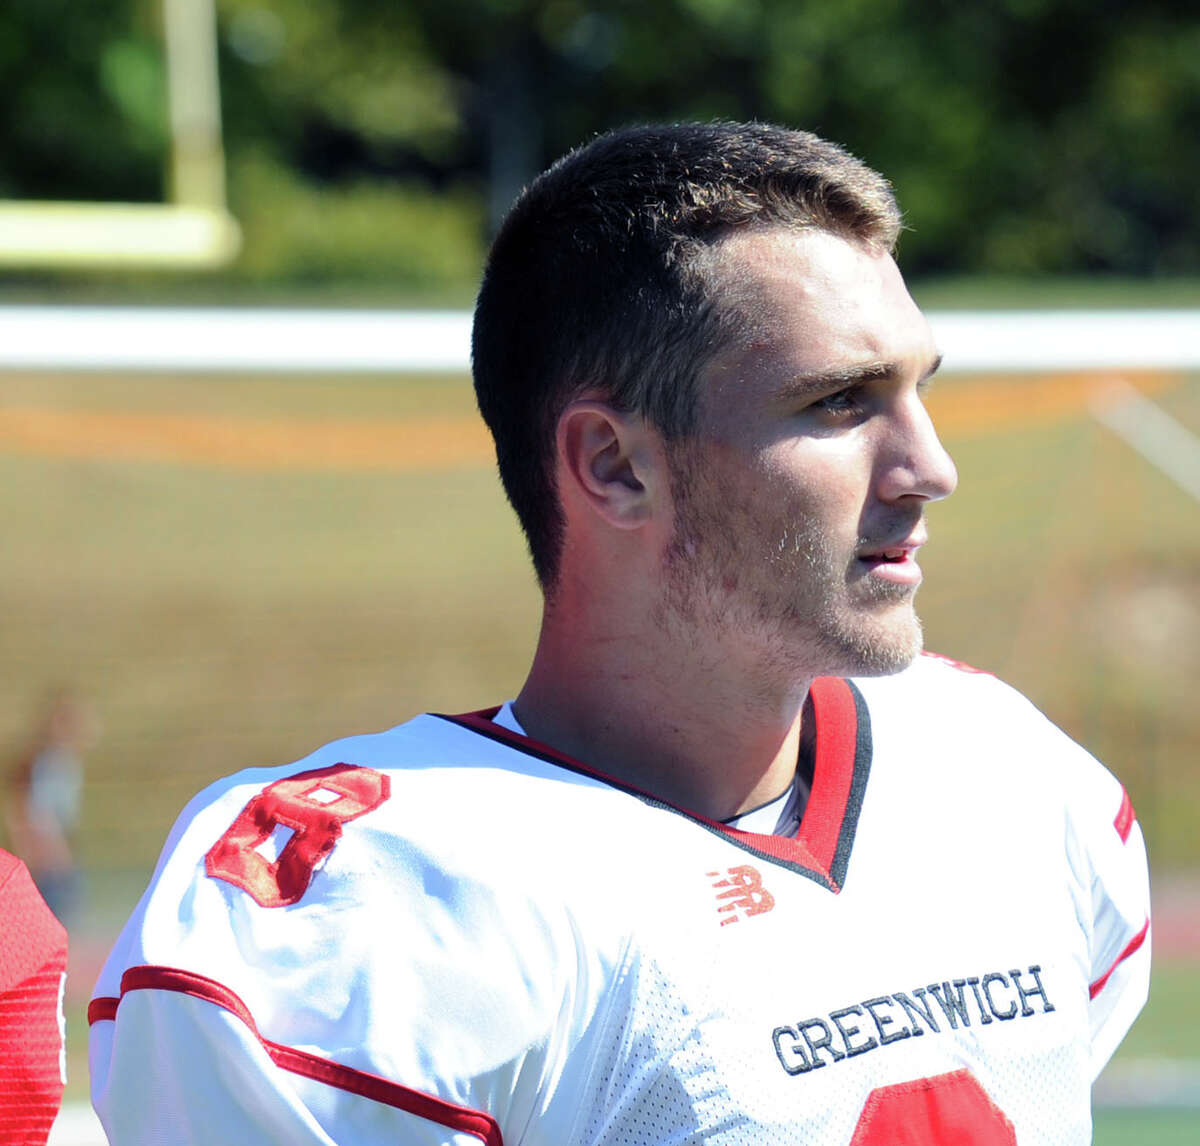 All FCIAC First Team Defense Strong defensive play has keyed Greenwich’s resurgence after its slow start to the season, with senior linebackers Weigold and Taulant Bici anchoring the unit. The hard-hitting linebackers have helped the Cardinals slow down opposing offenses the past seven games.